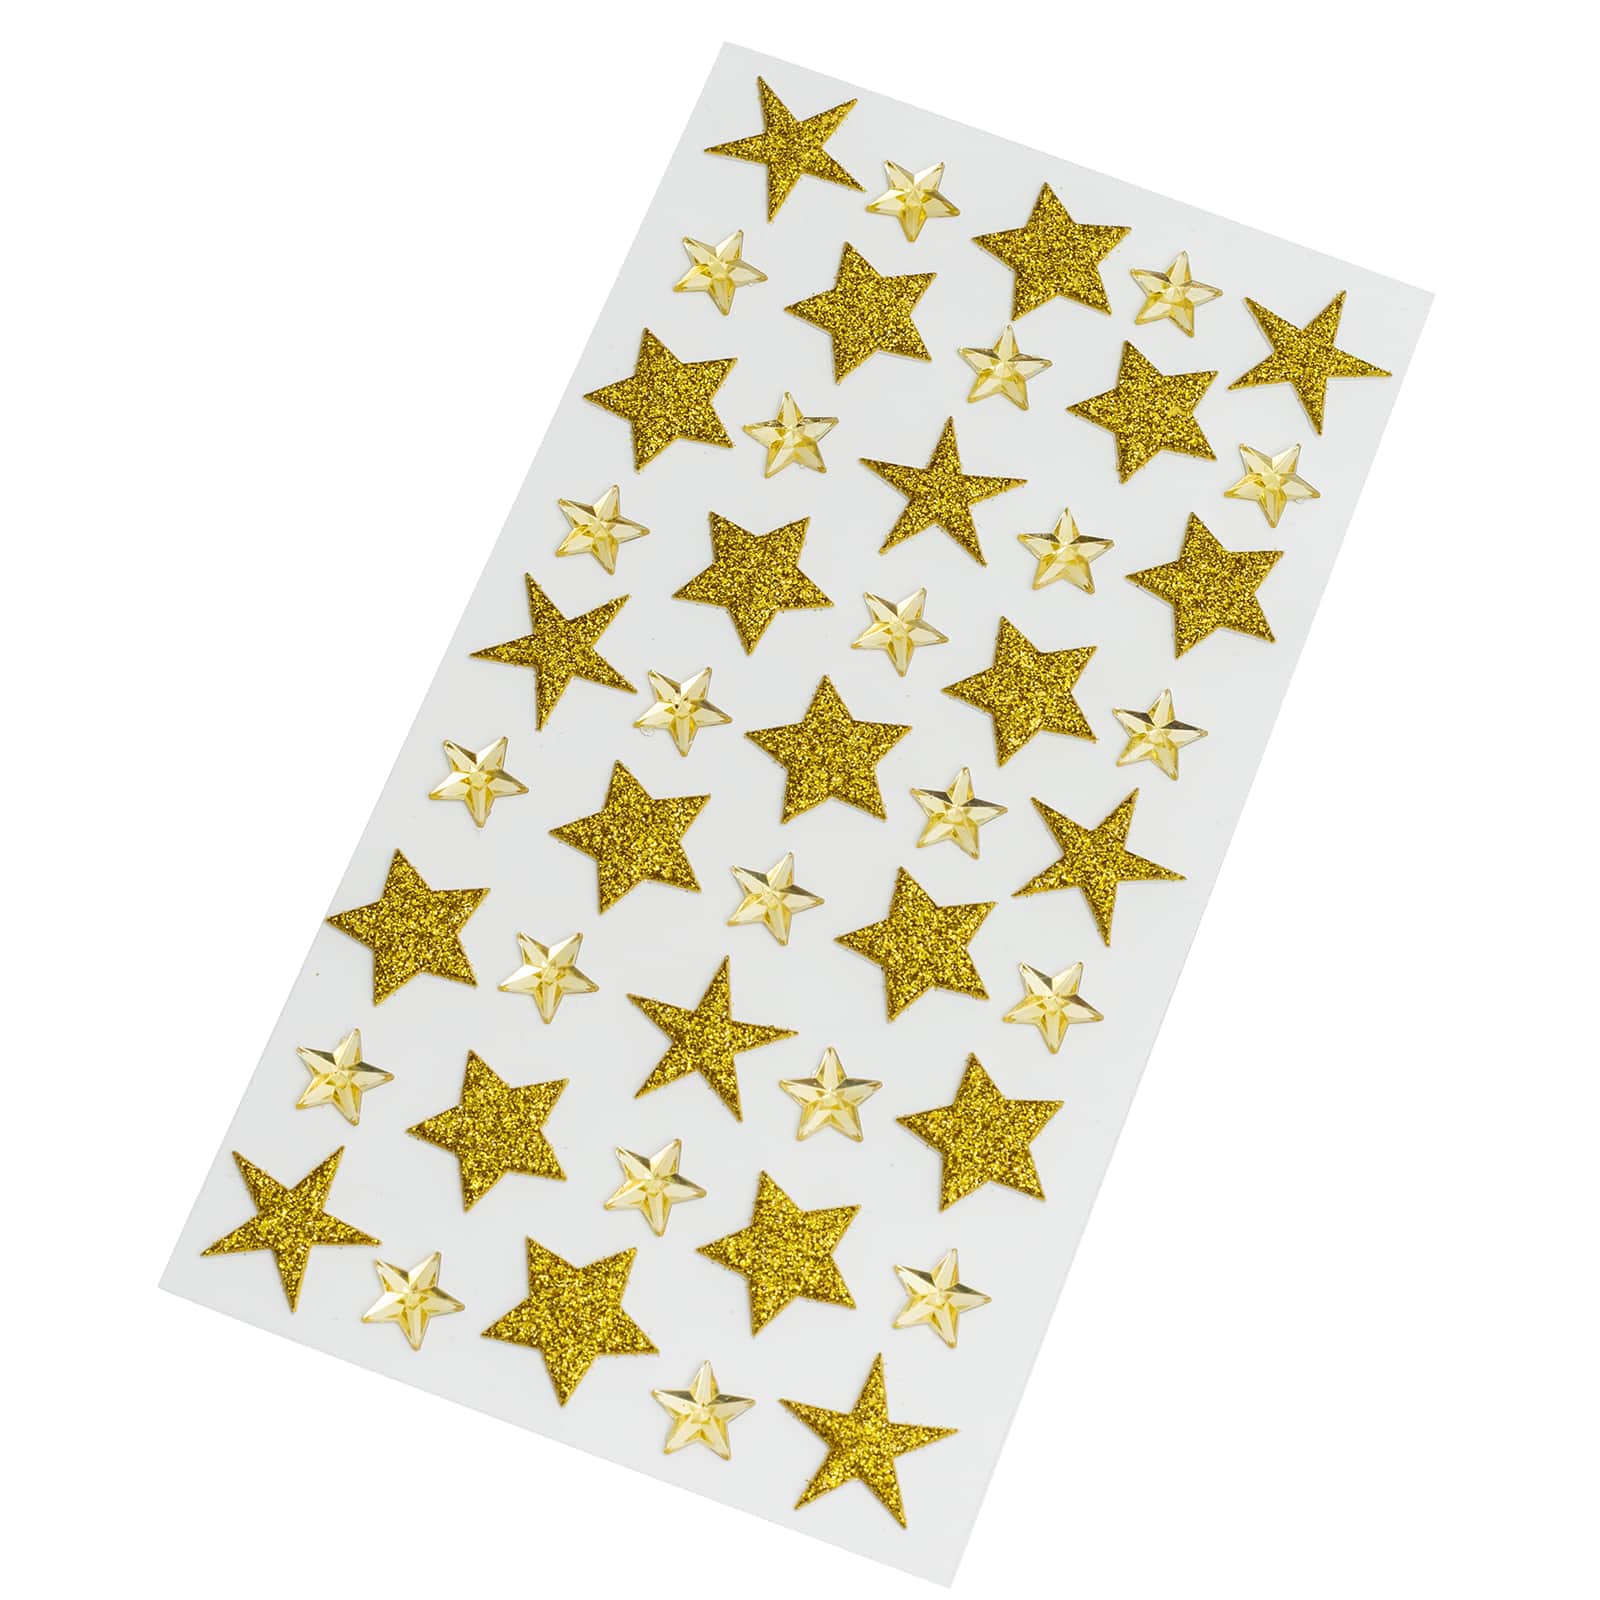 Mybbshower 1.5 inch Gold Glitter Adhesive Star Stickers for New